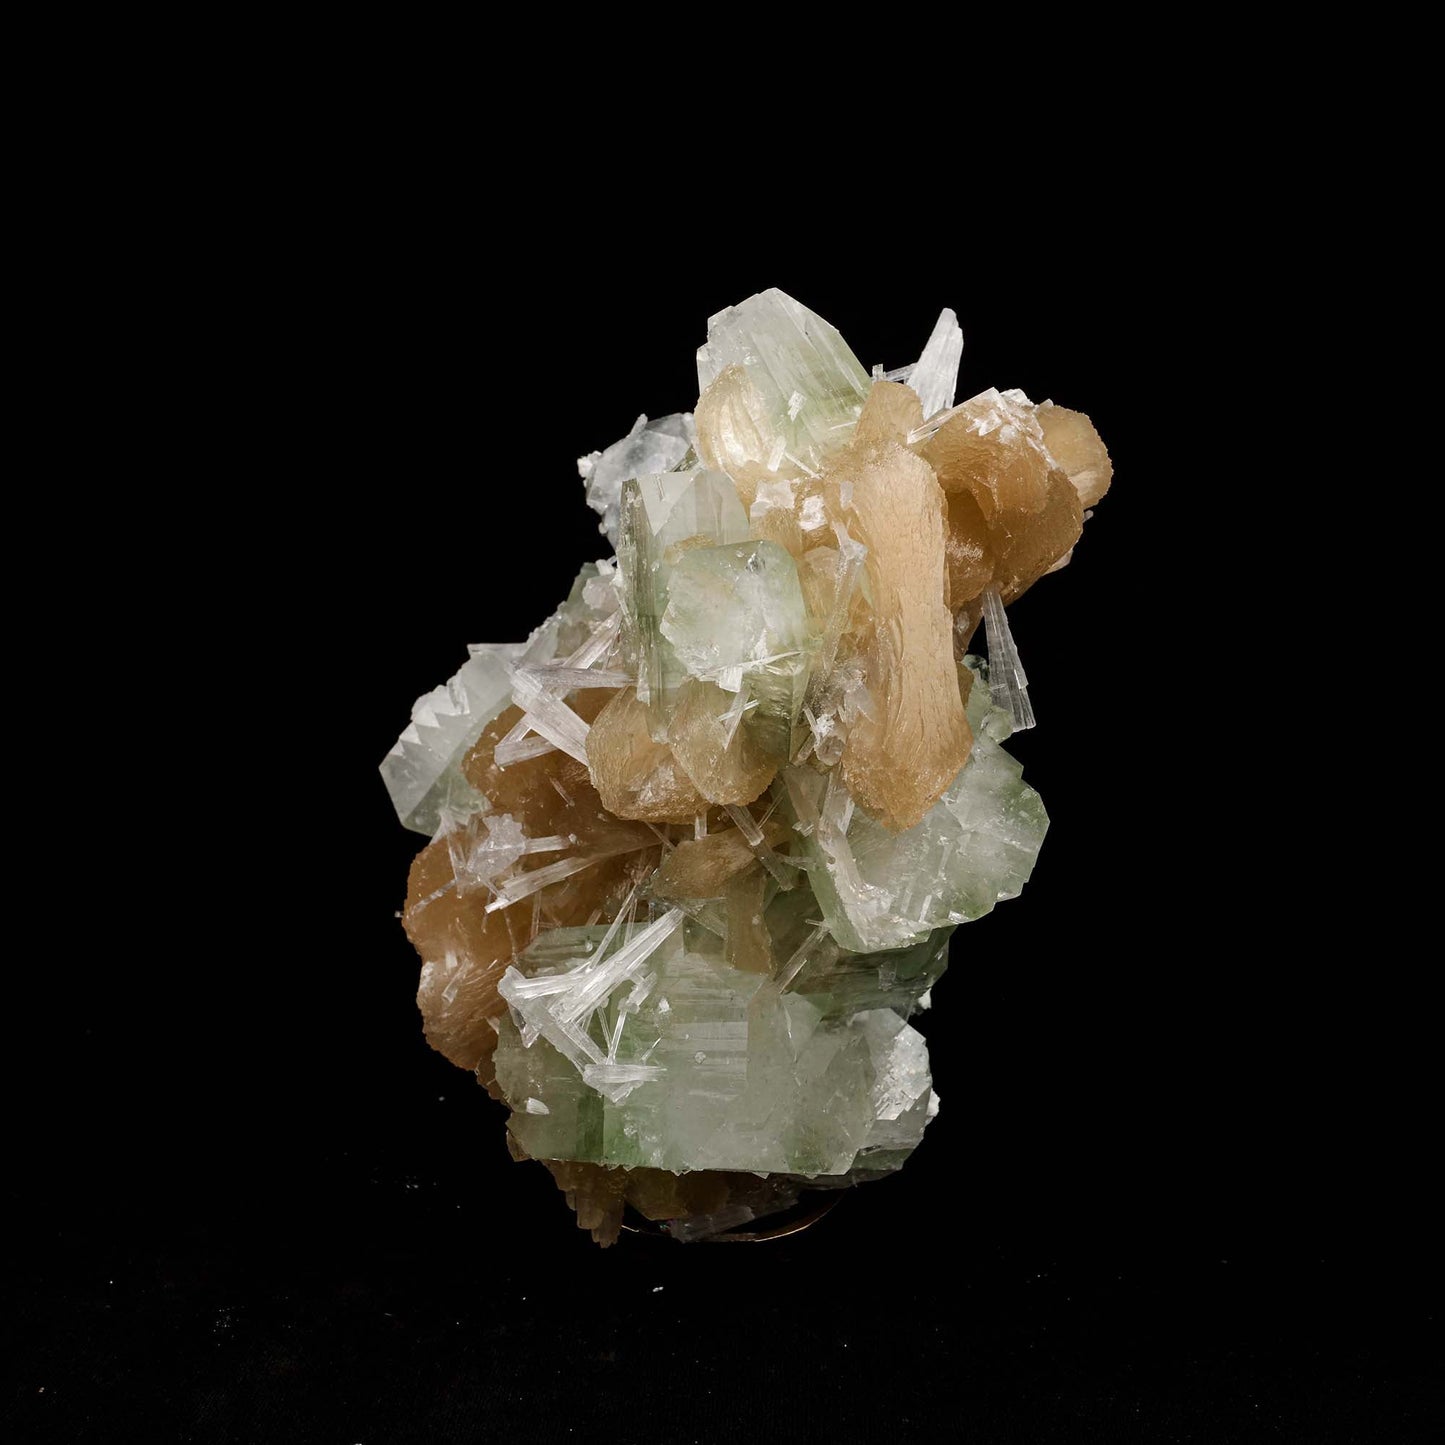 Green Apophyllite with Stilbite, Scolecite Sprays Natural Mineral Spec…  https://www.superbminerals.us/products/green-apophyllite-with-stilbite-scolecite-sprays-natural-mineral-specimen-b-5199  Features: A very aesthetic combination piece featuring numerous large, lustrous green modified cubes on a dark-brown matrix hosting numerous acicular sprays of colorless to white, satiny Scolecite Primary Mineral(s): ApophylliteSecondary Mineral(s): Stilbite, ScoleciteMatrix: N/A 6 Inch x 5 InchWeight : 1068